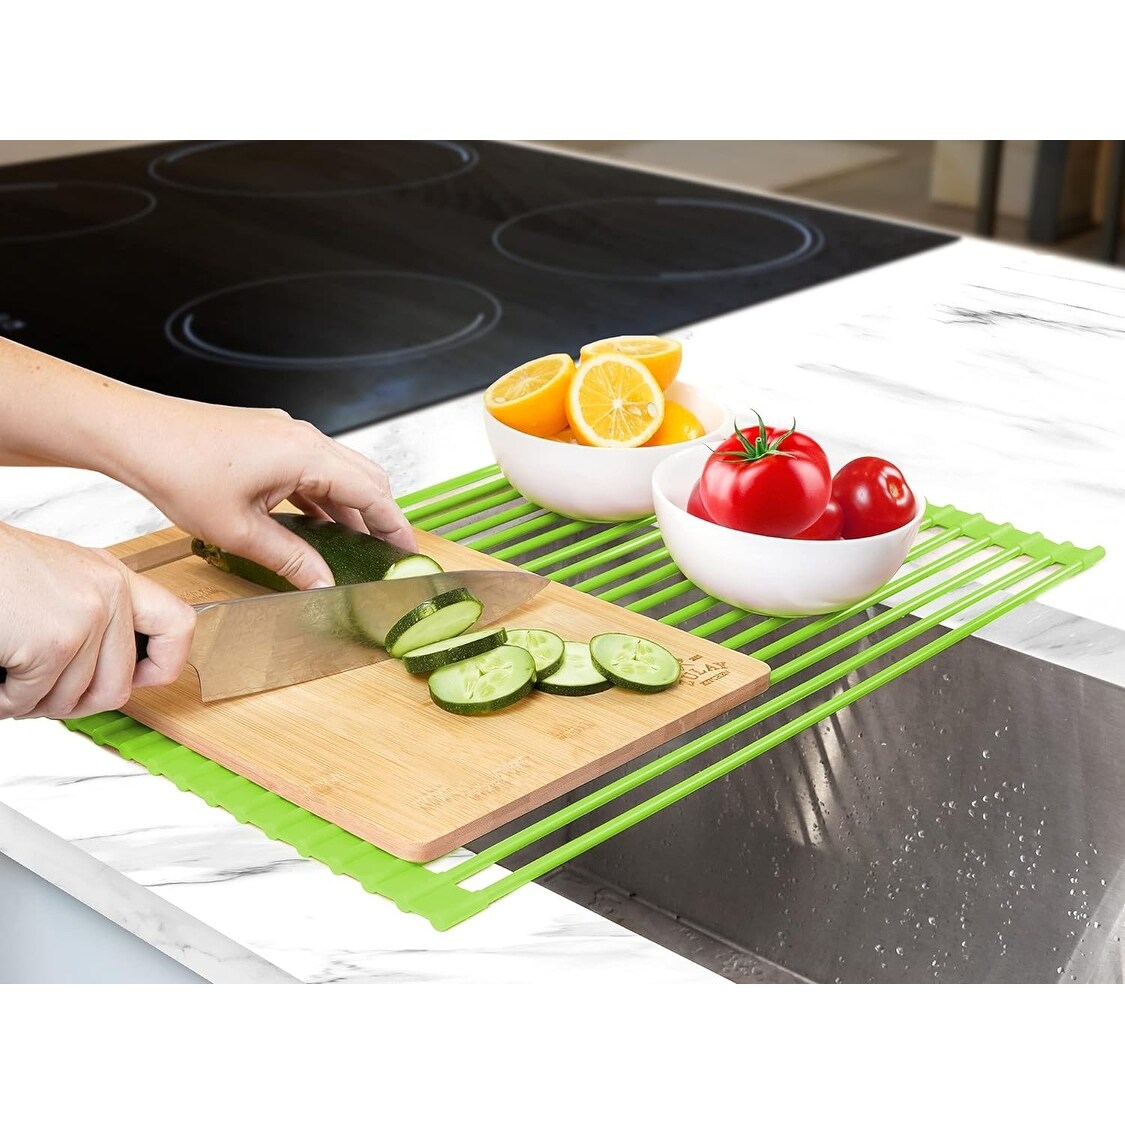 Zulay Kitchen Multipurpose Heavy Duty Silicone Roll Up Sink Drying Rack  Large